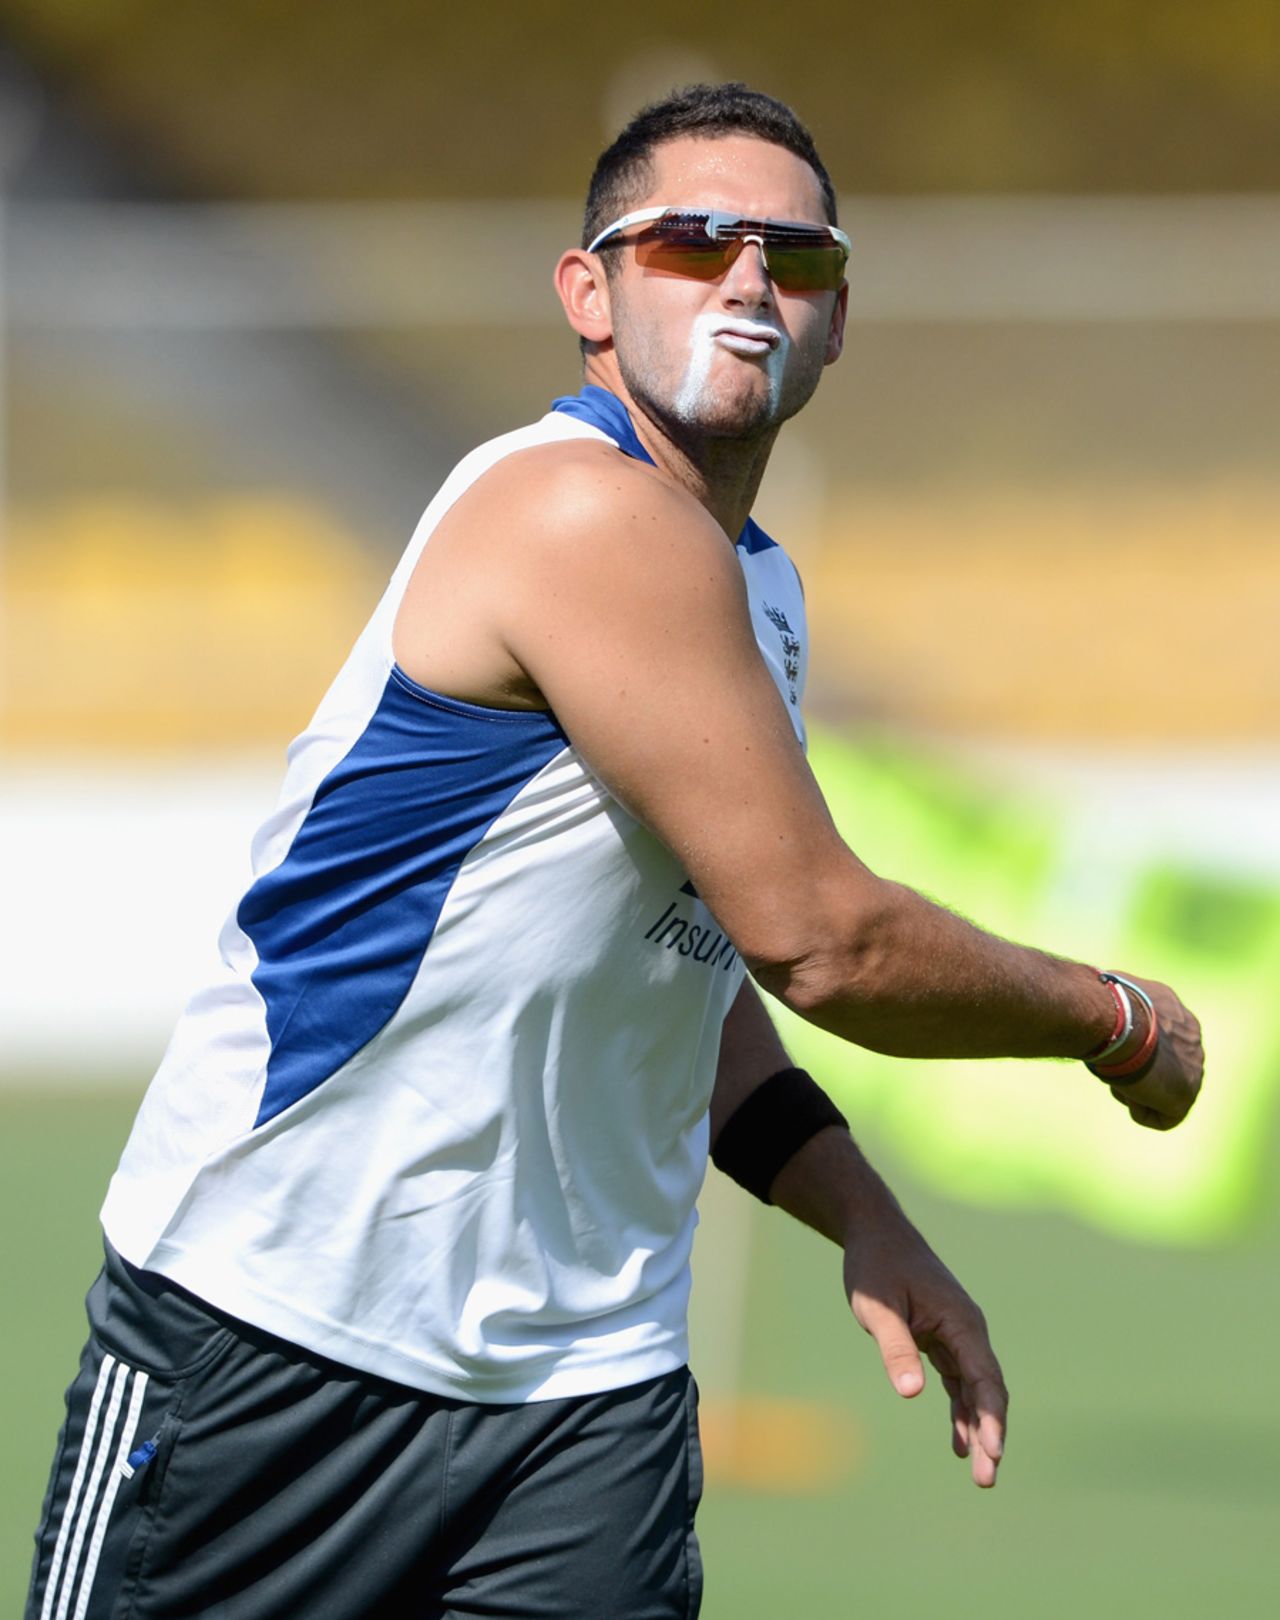 Tim Bresnan fields during a practice session, Ahmedabad, November 13, 2012